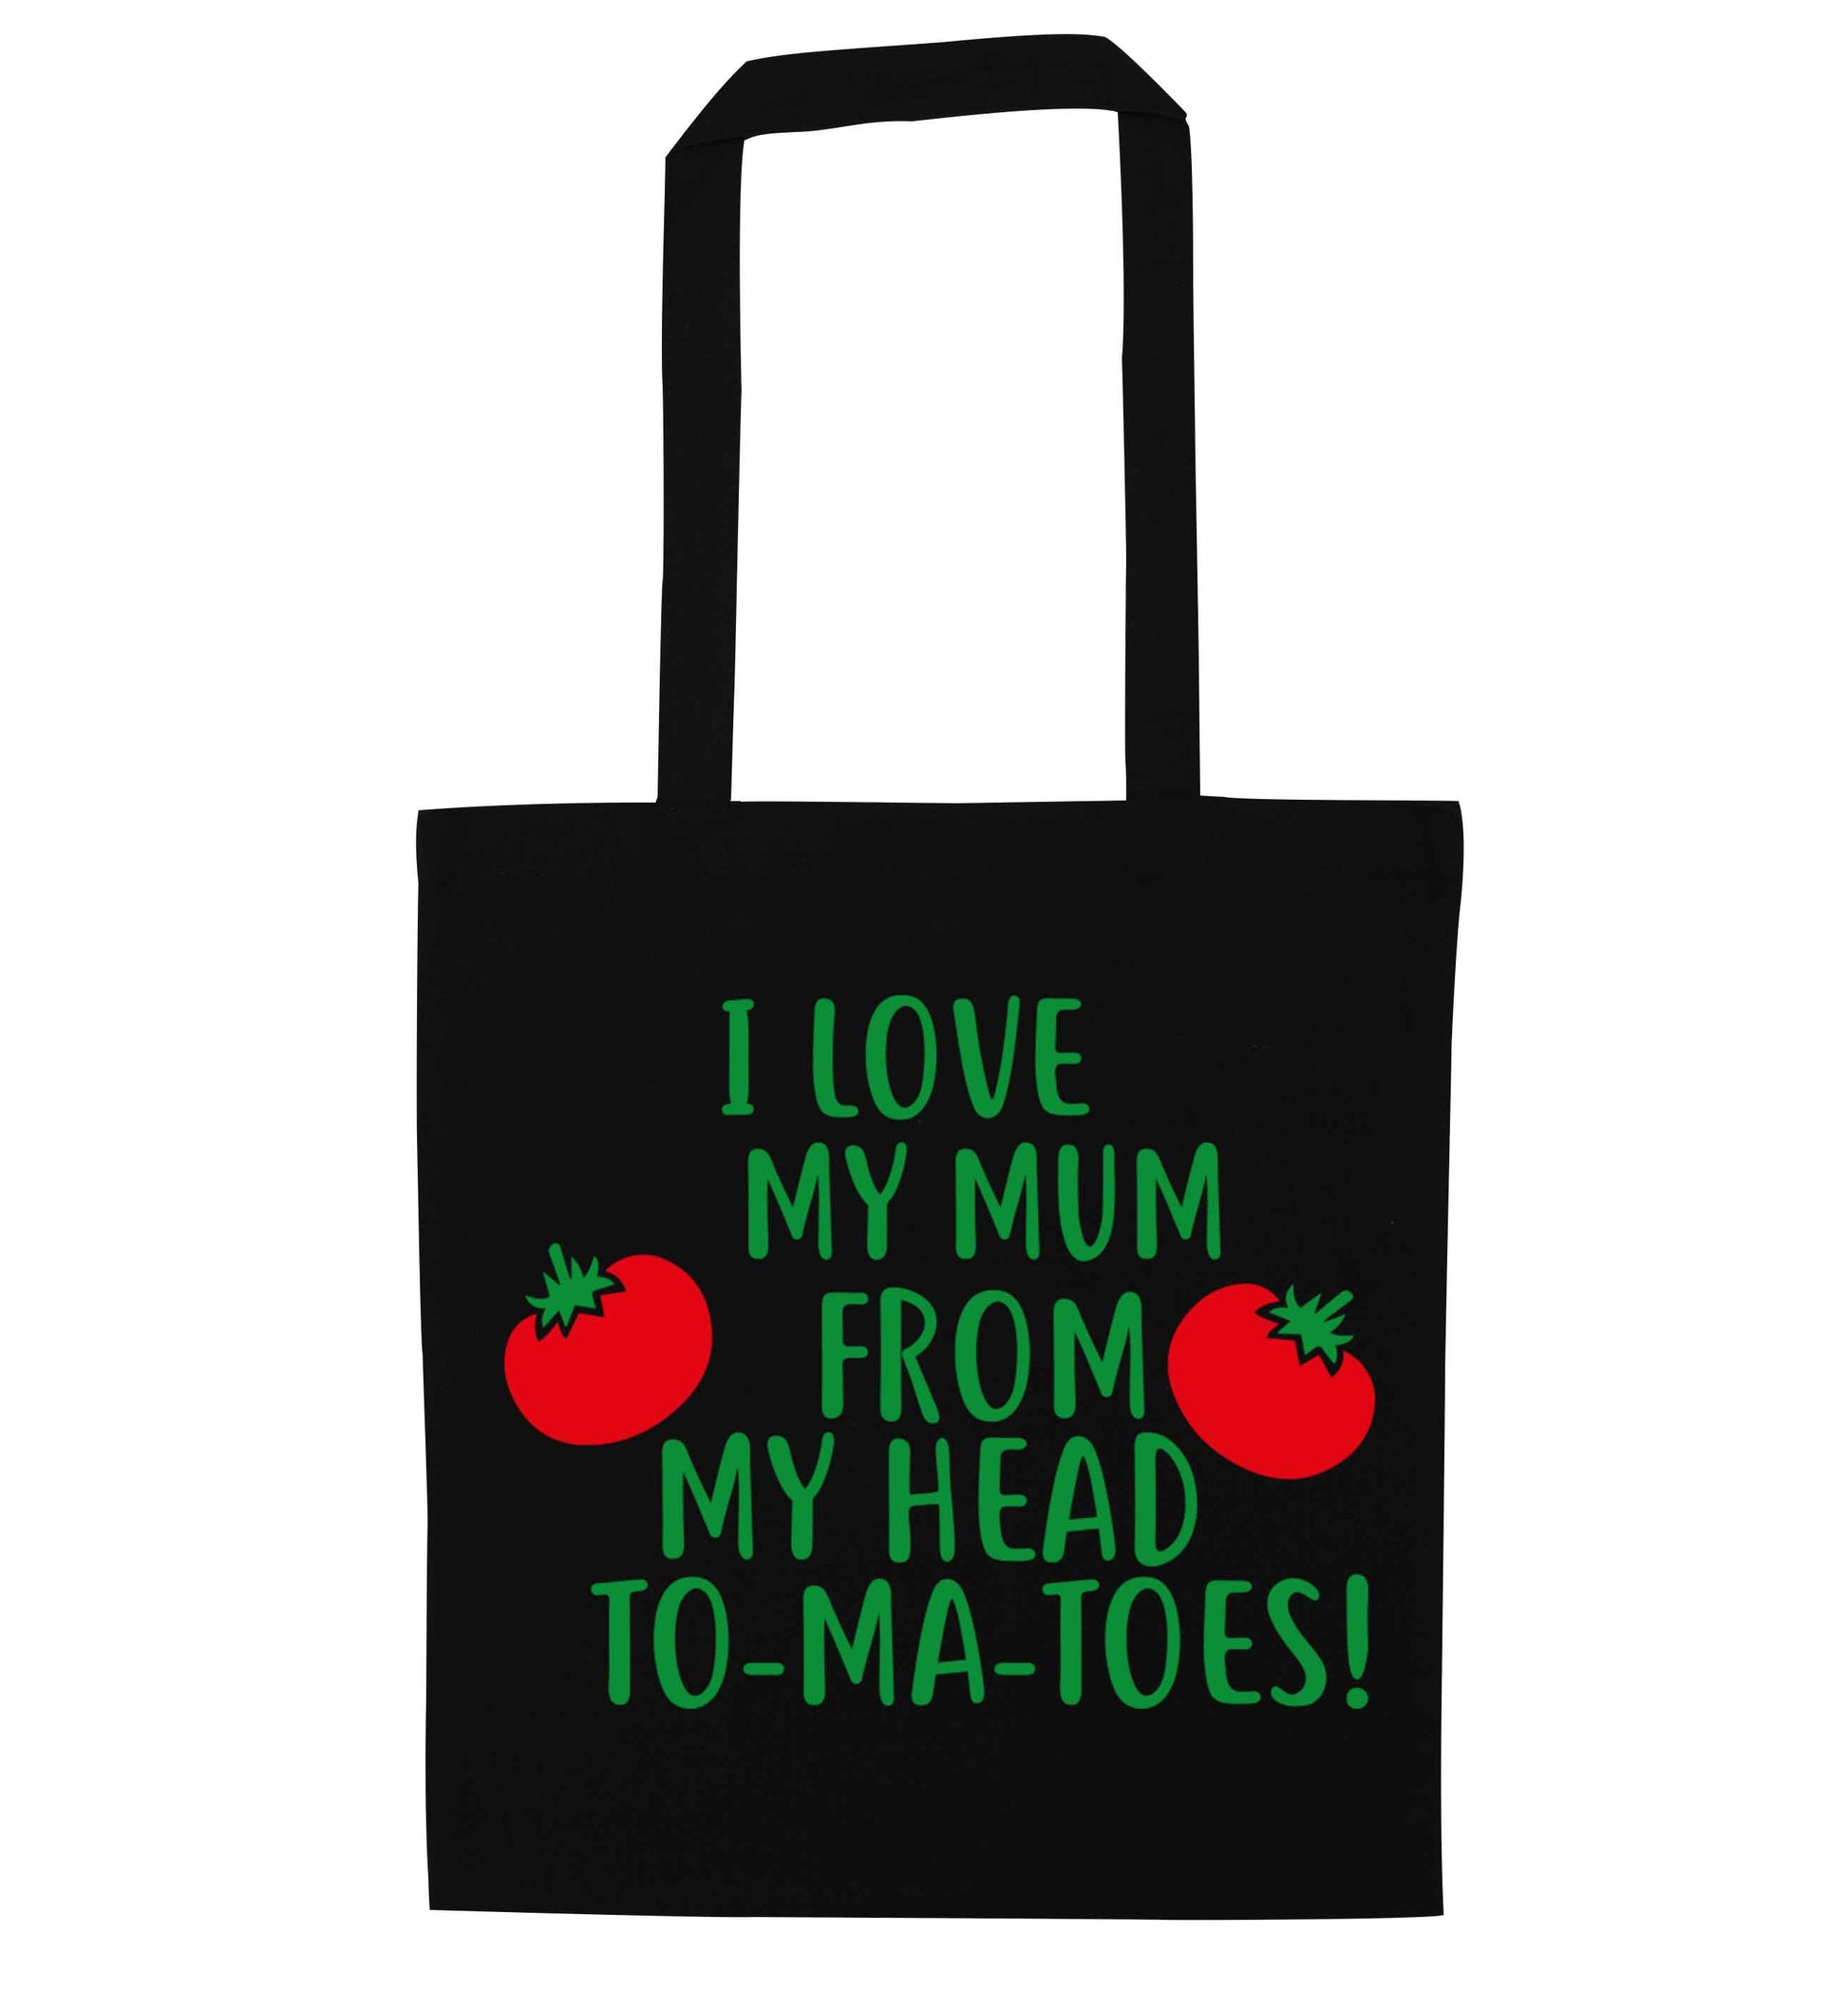 I love my mum from my head to-my-toes! black tote bag